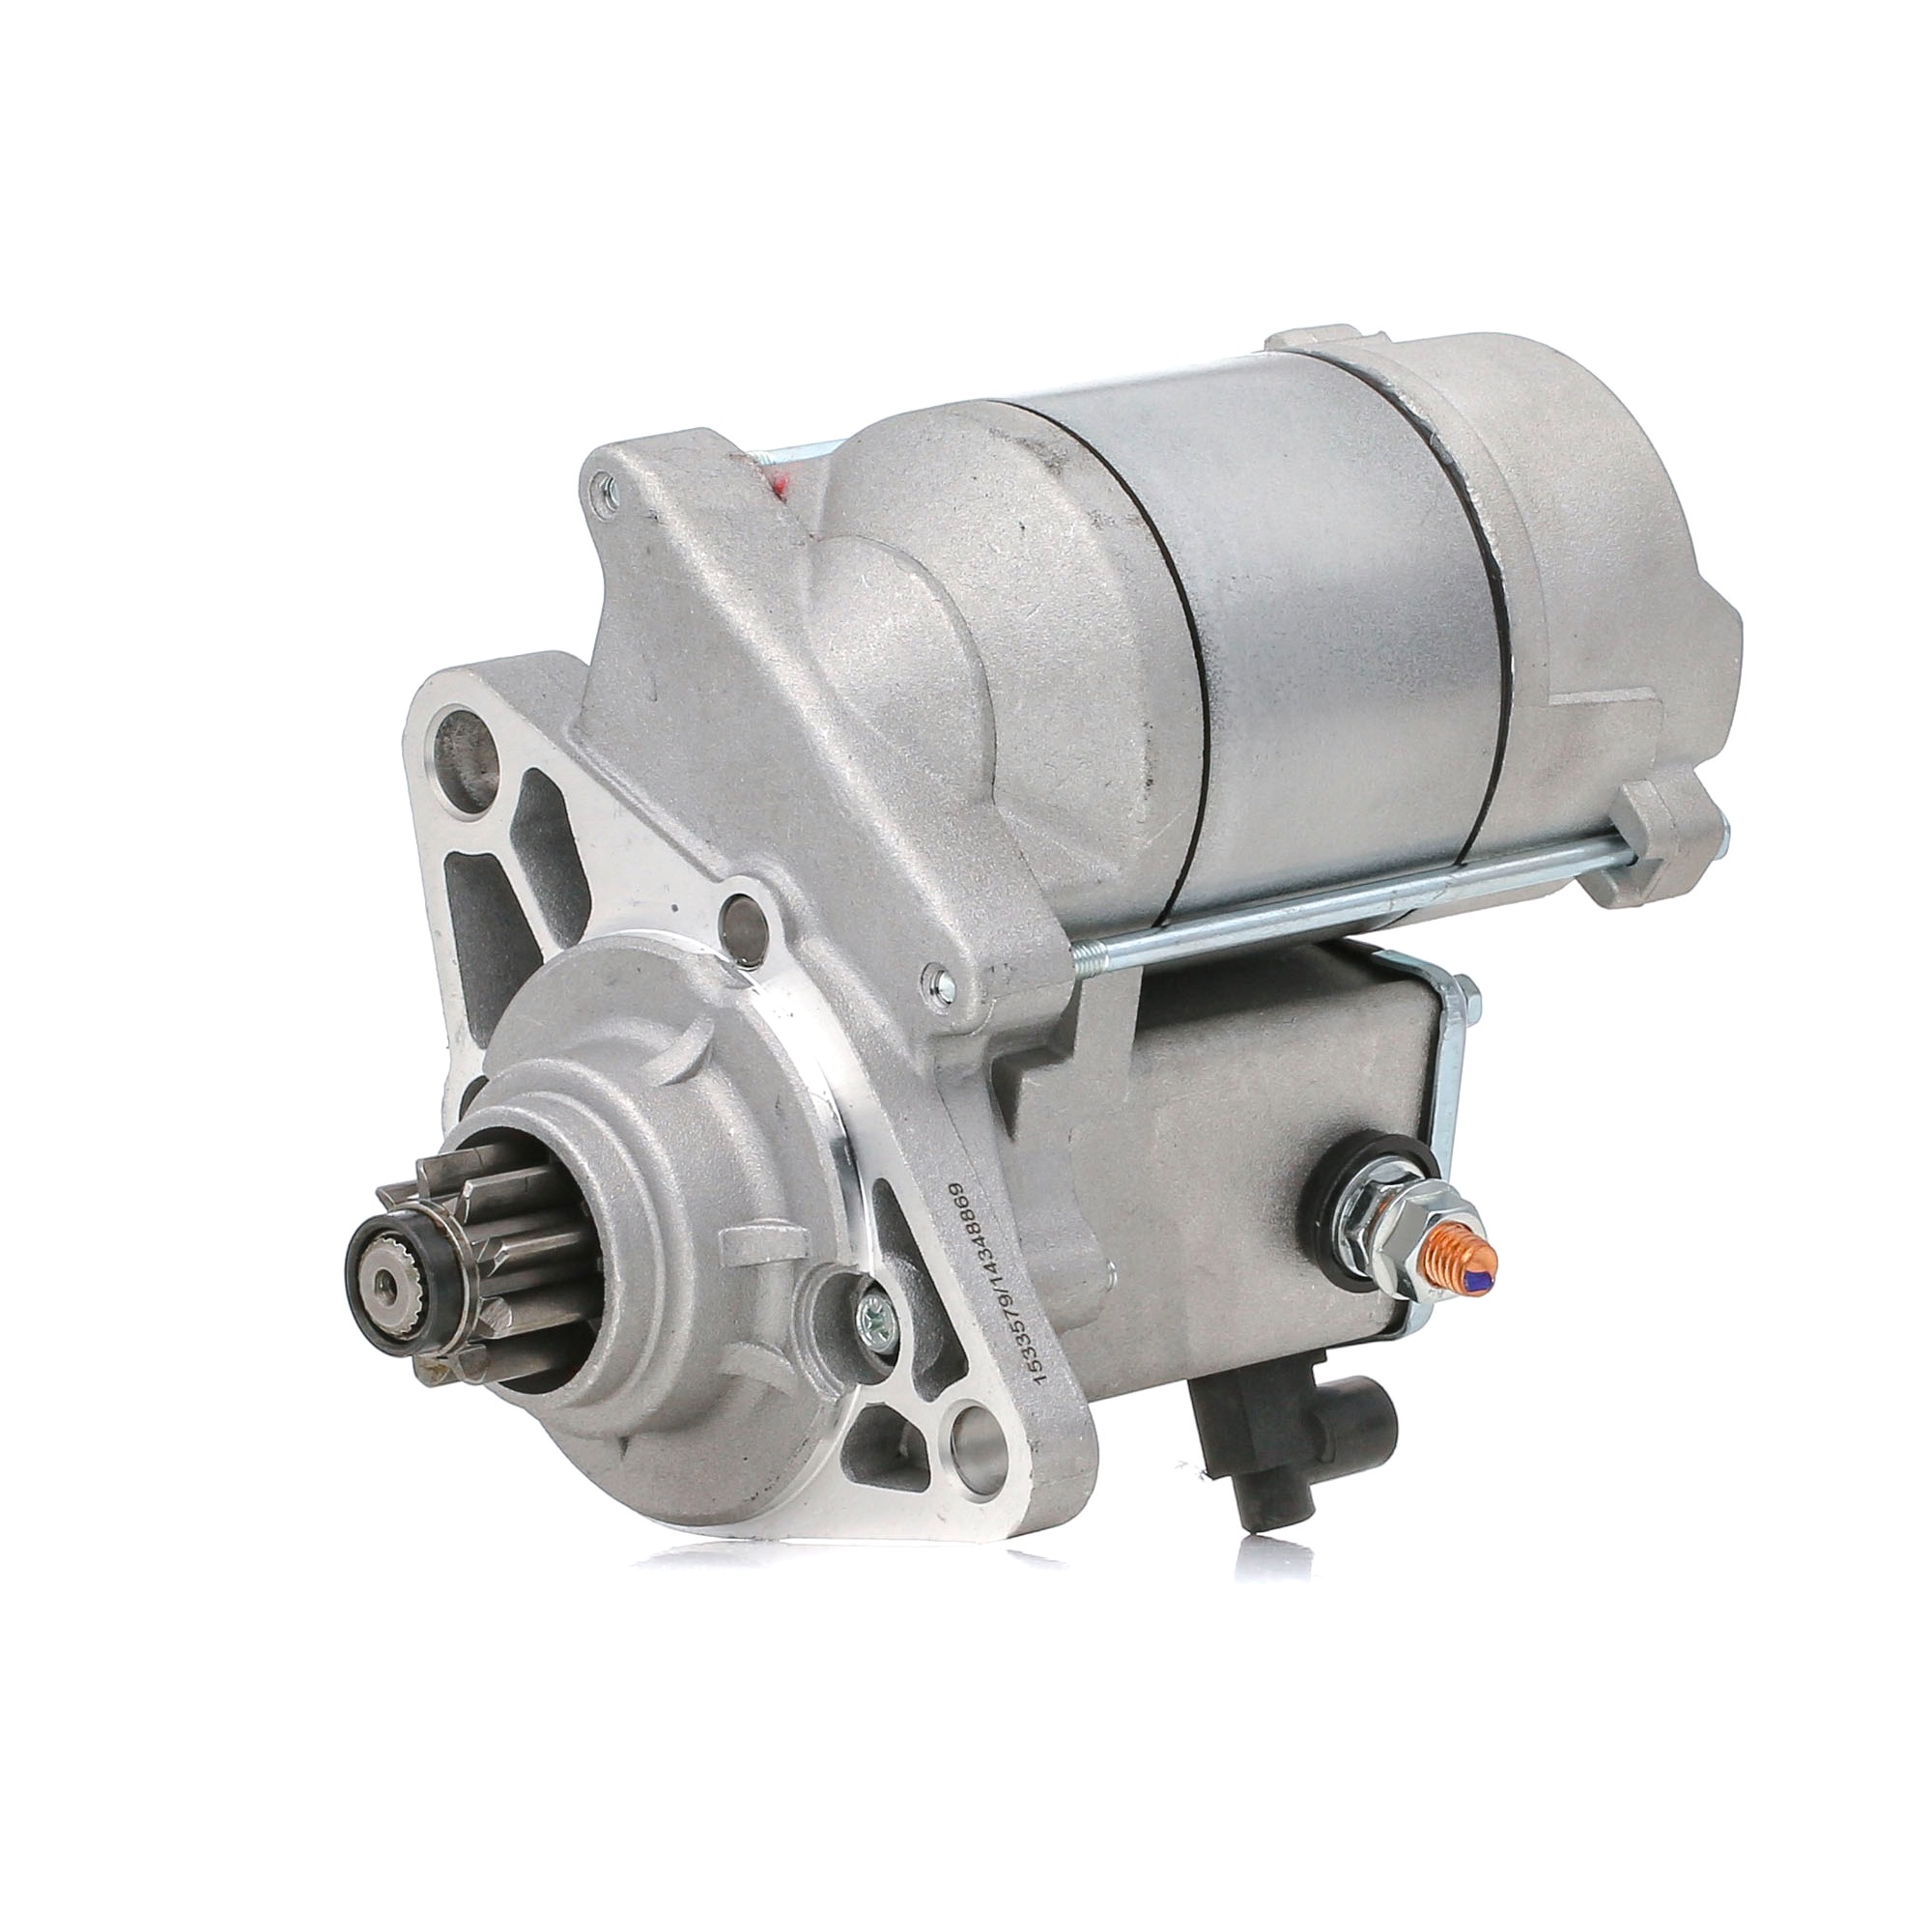 RIDEX 2S0376 Starter motor 12V, 1,4kW, Number of Teeth: 9, with 50(Jet) clamp, Ø 75 mm